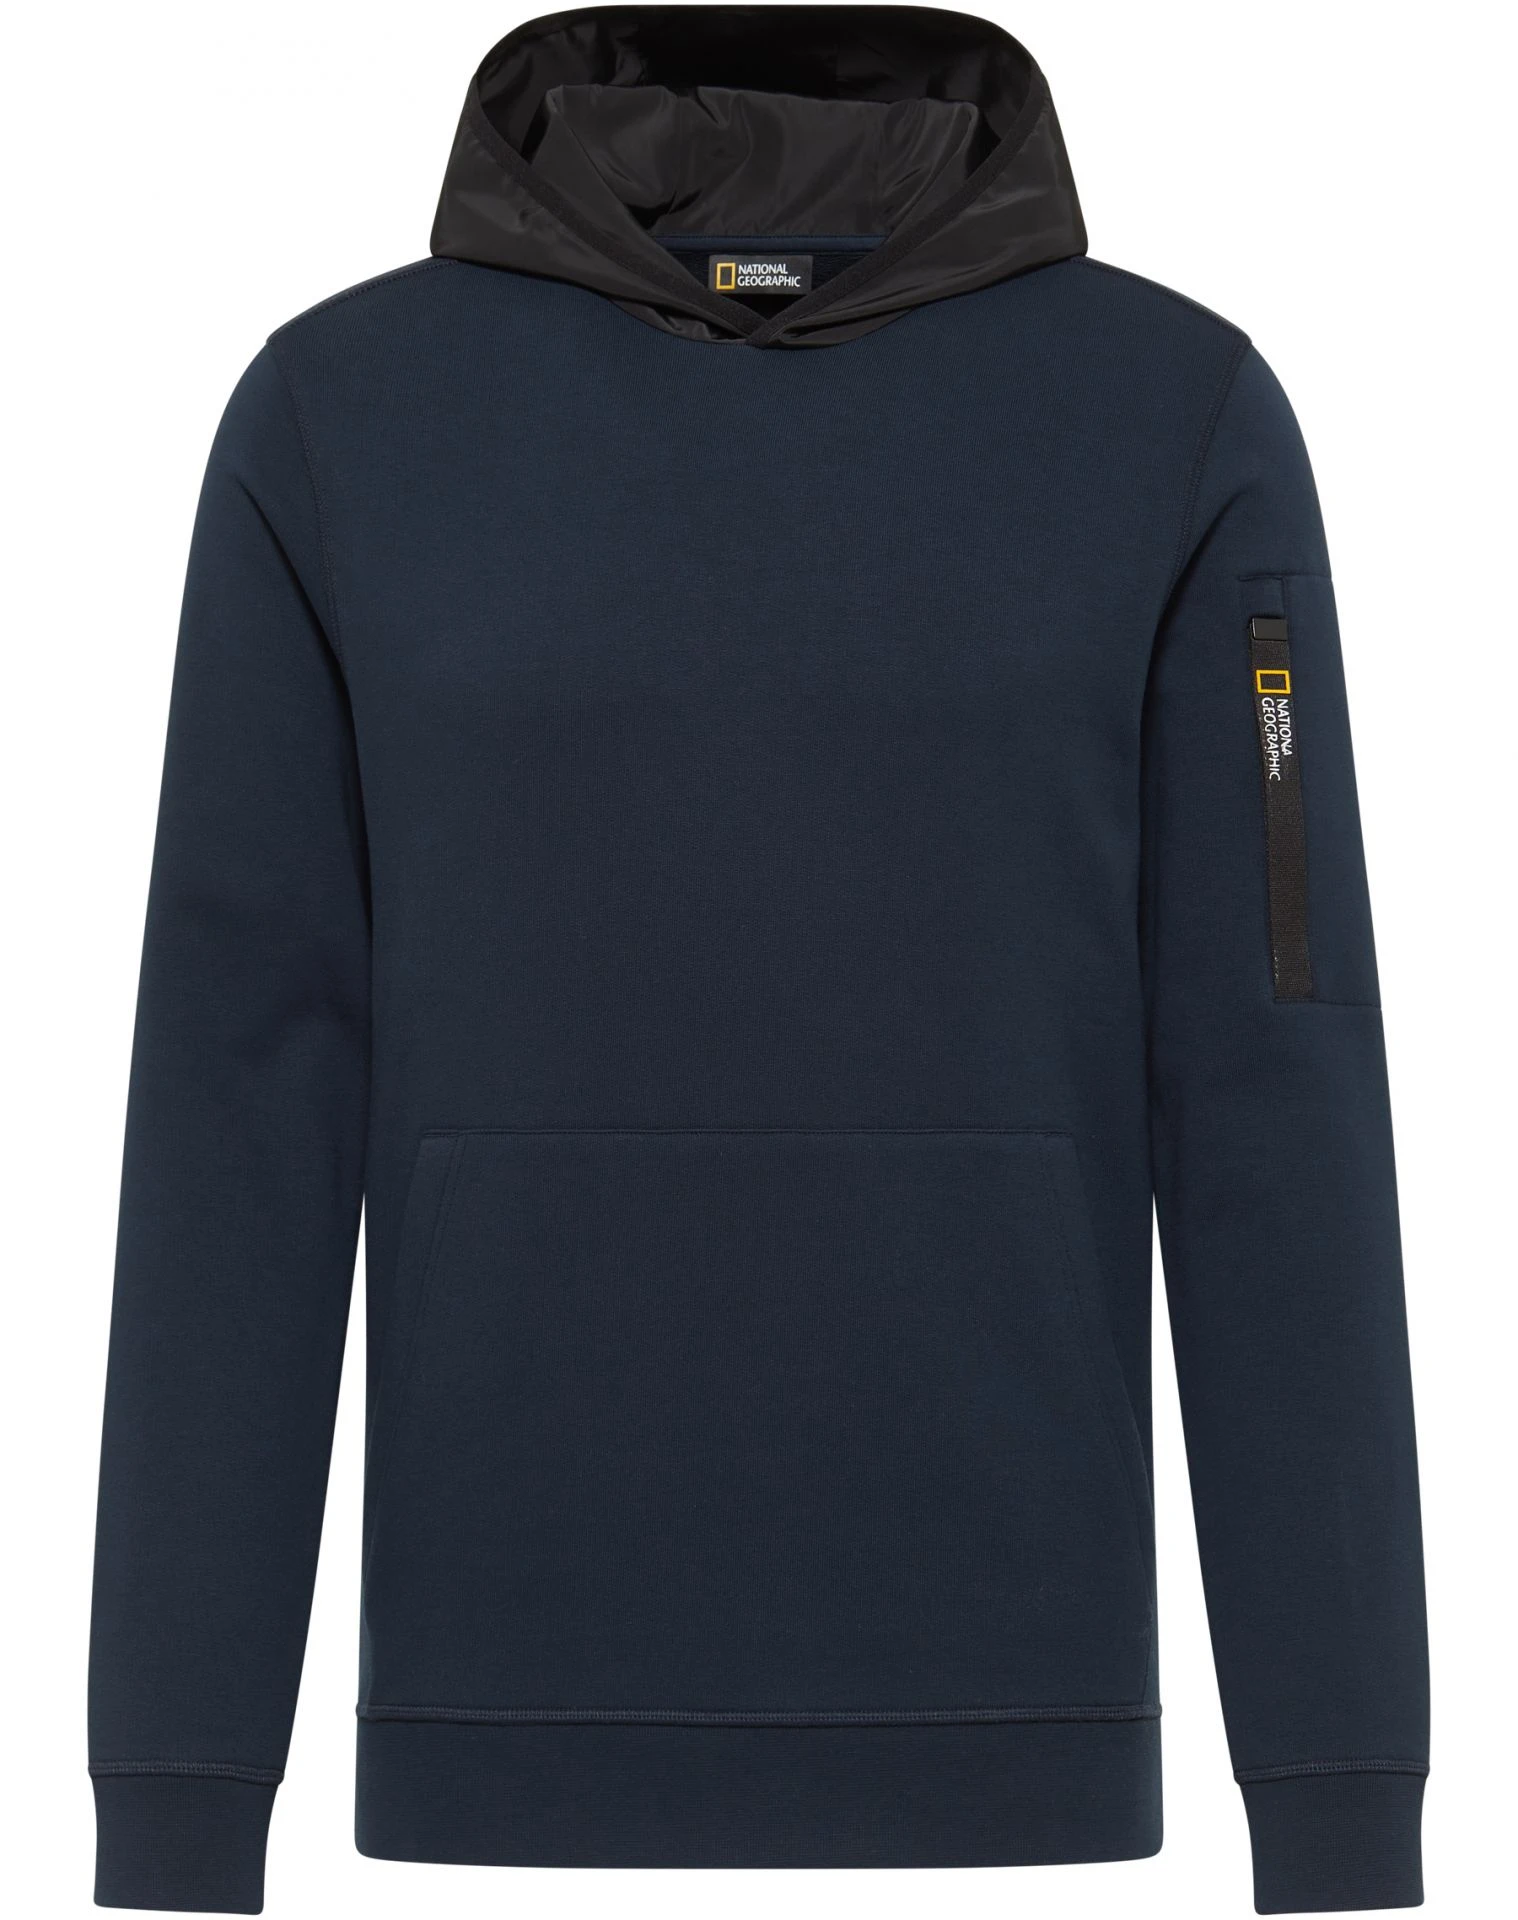 NATIONAL GEOGRAPHIC M122 02 156 hooded sweat